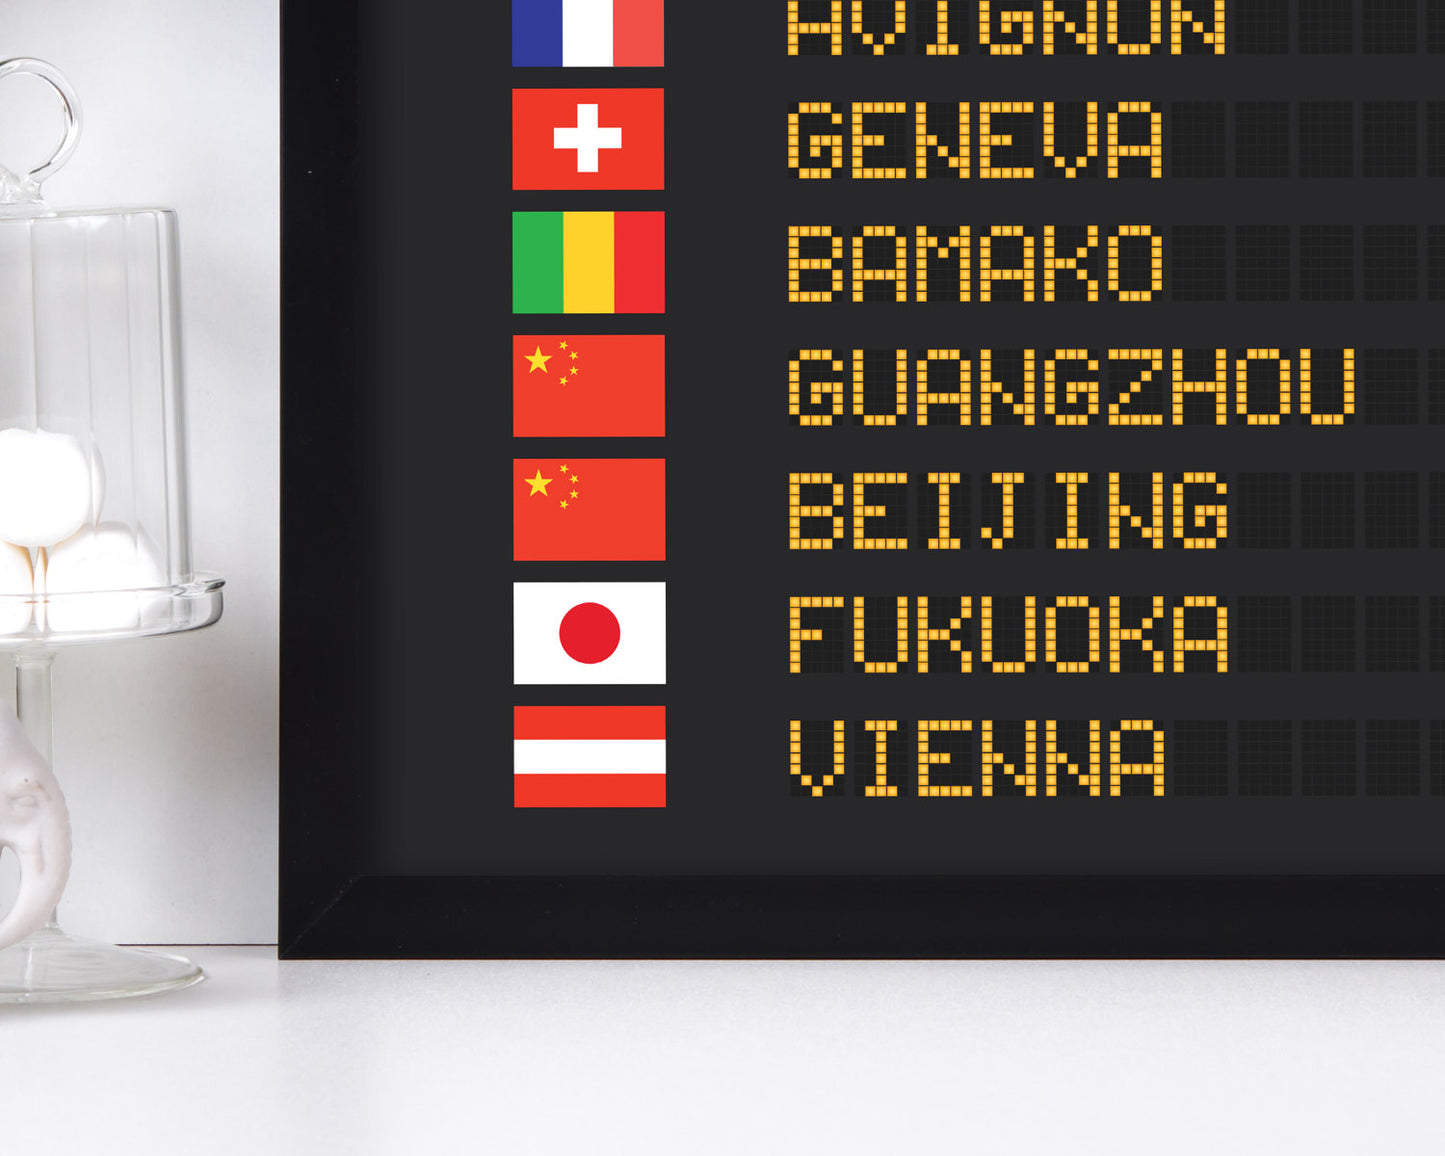 Printed Personalized Airport Board With Flags